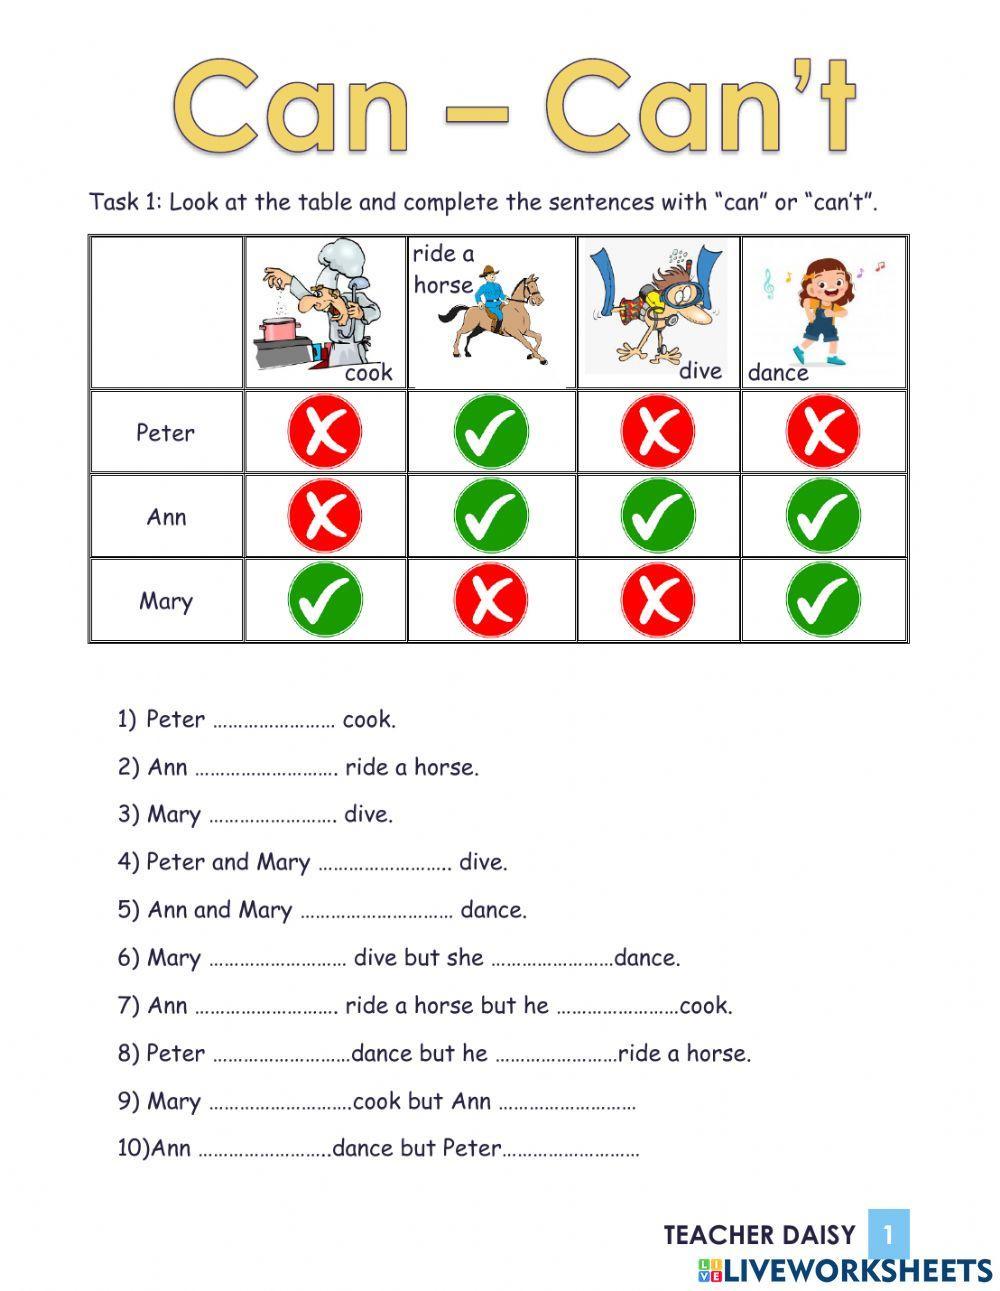 Can - can't online activity for grade 3 | Live Worksheets